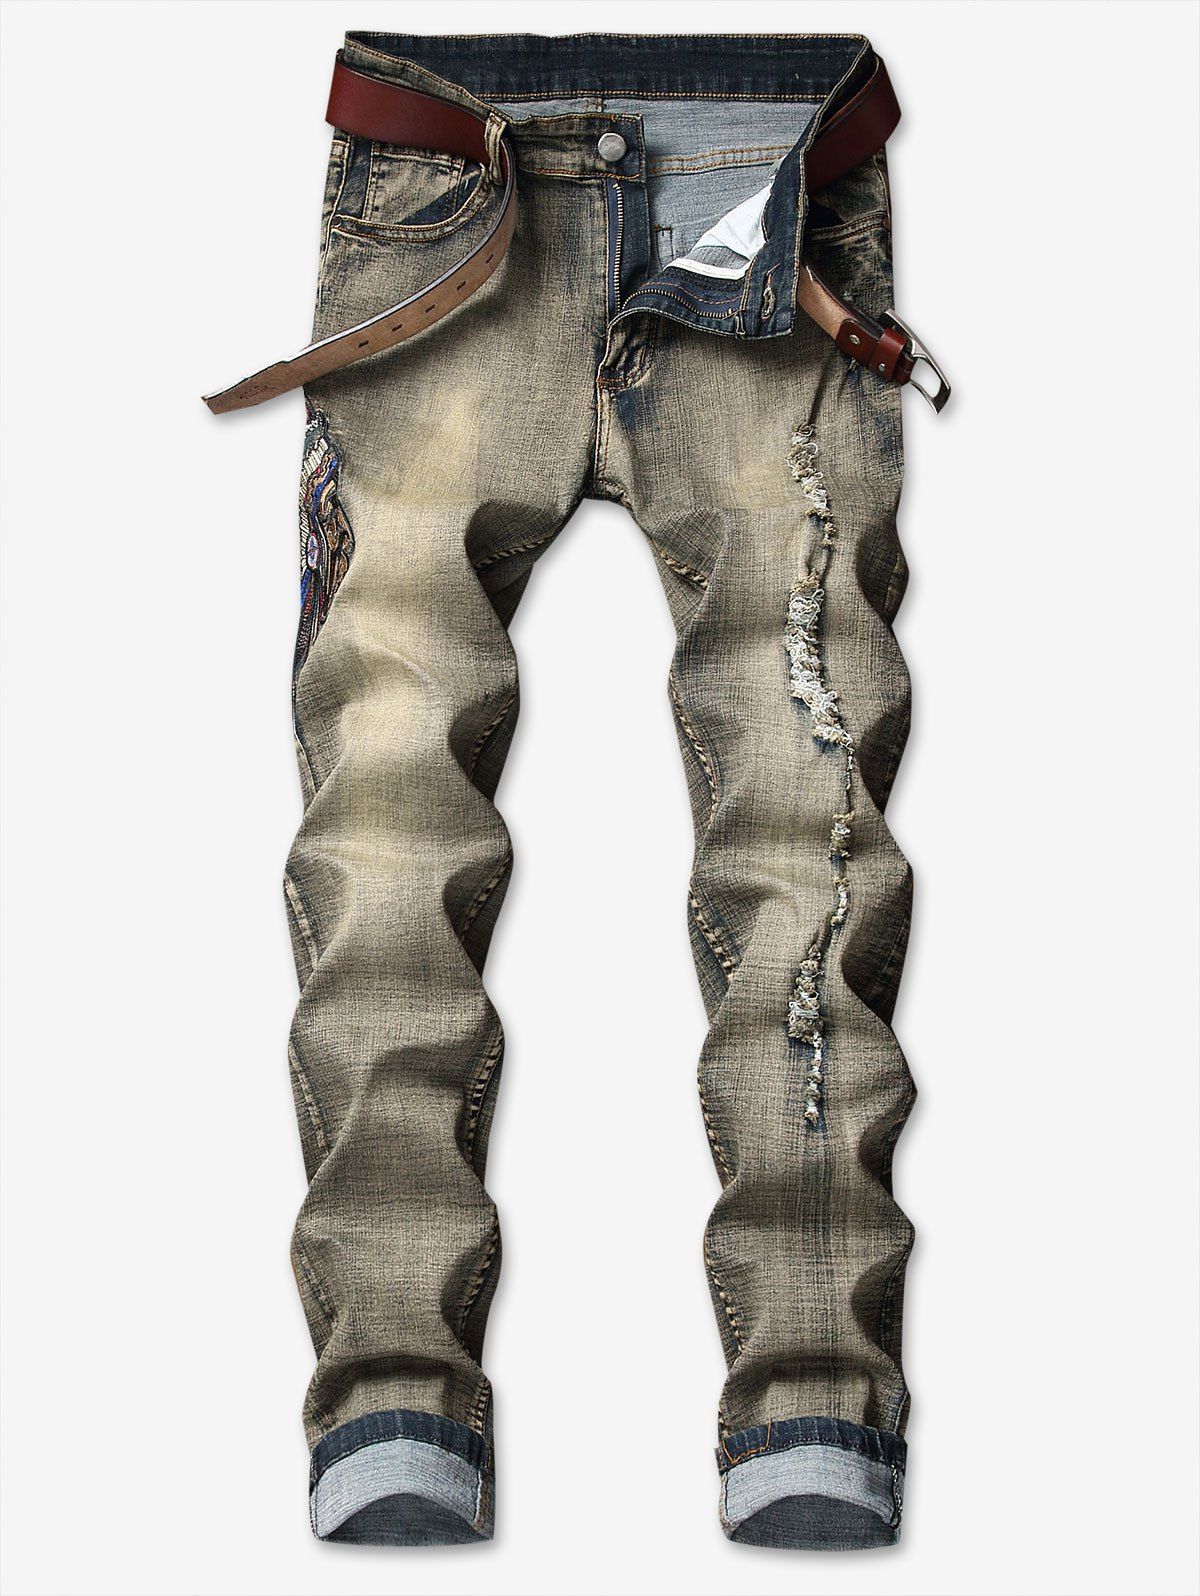 Sale Tribal Man Head Embroidery Ripped Vintage Jeans  